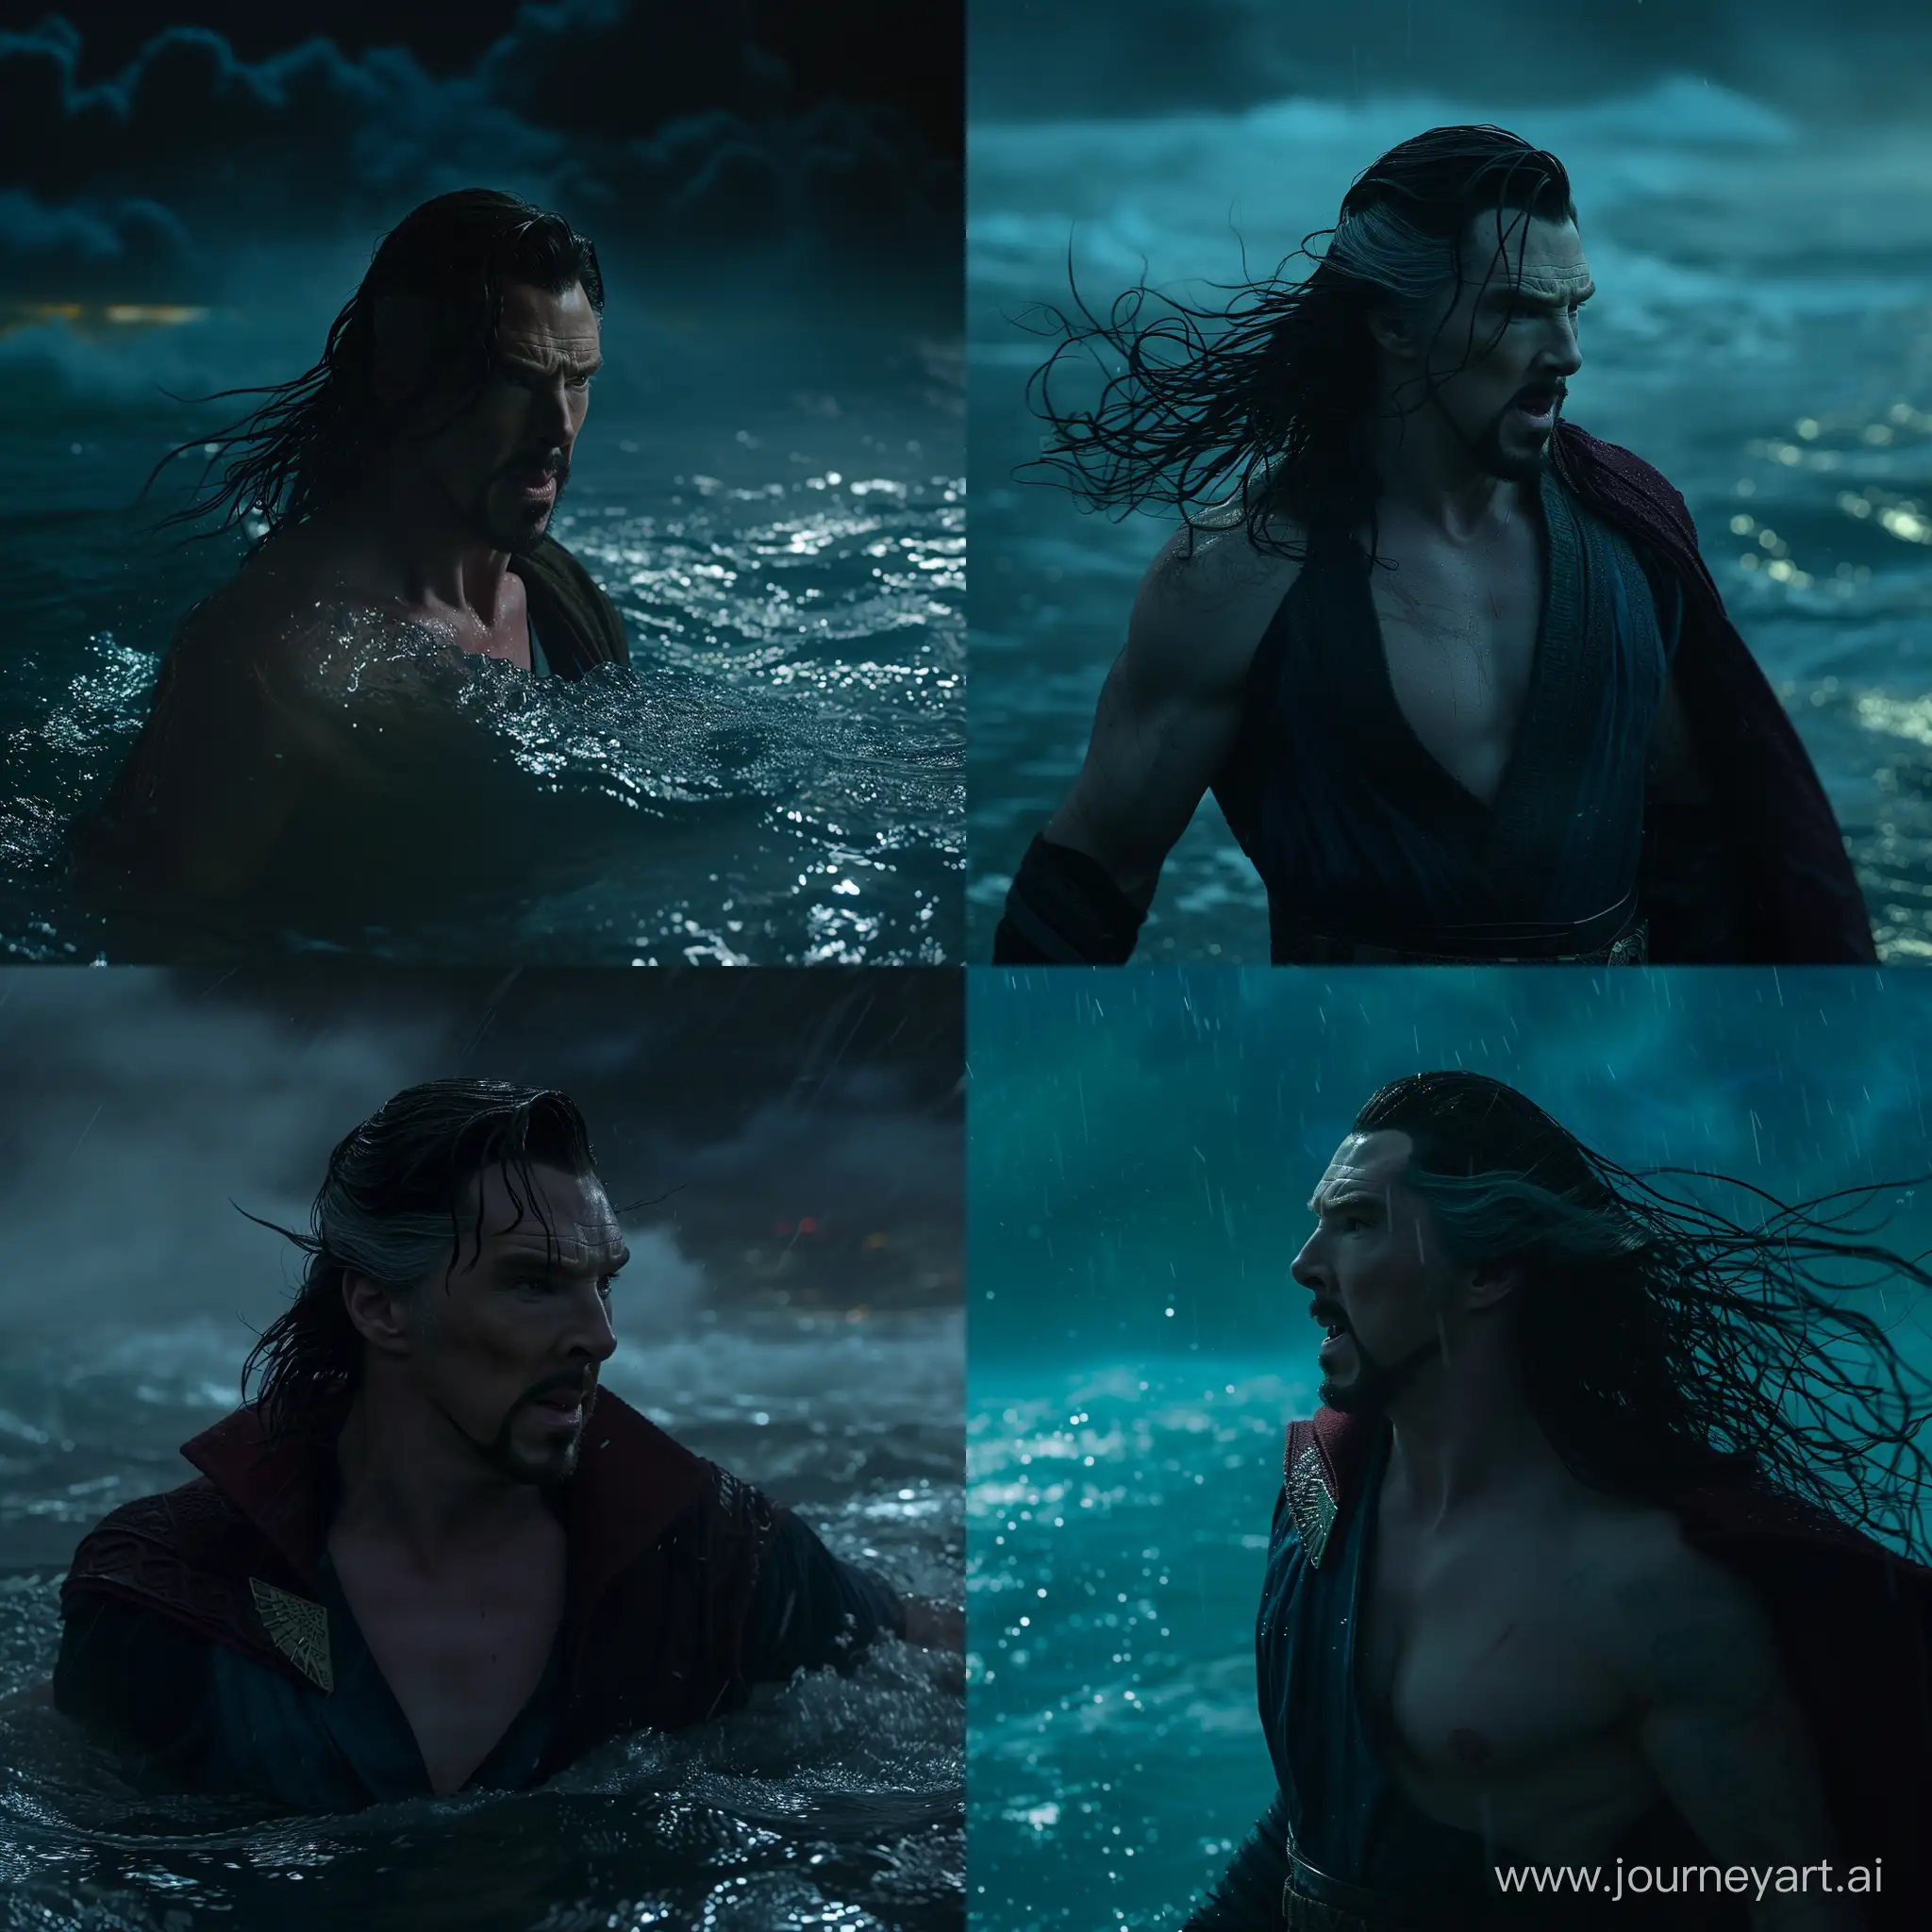 Shoulder-level shot of Doctor Strange, with long hair down, shirtless, in the sea, during night